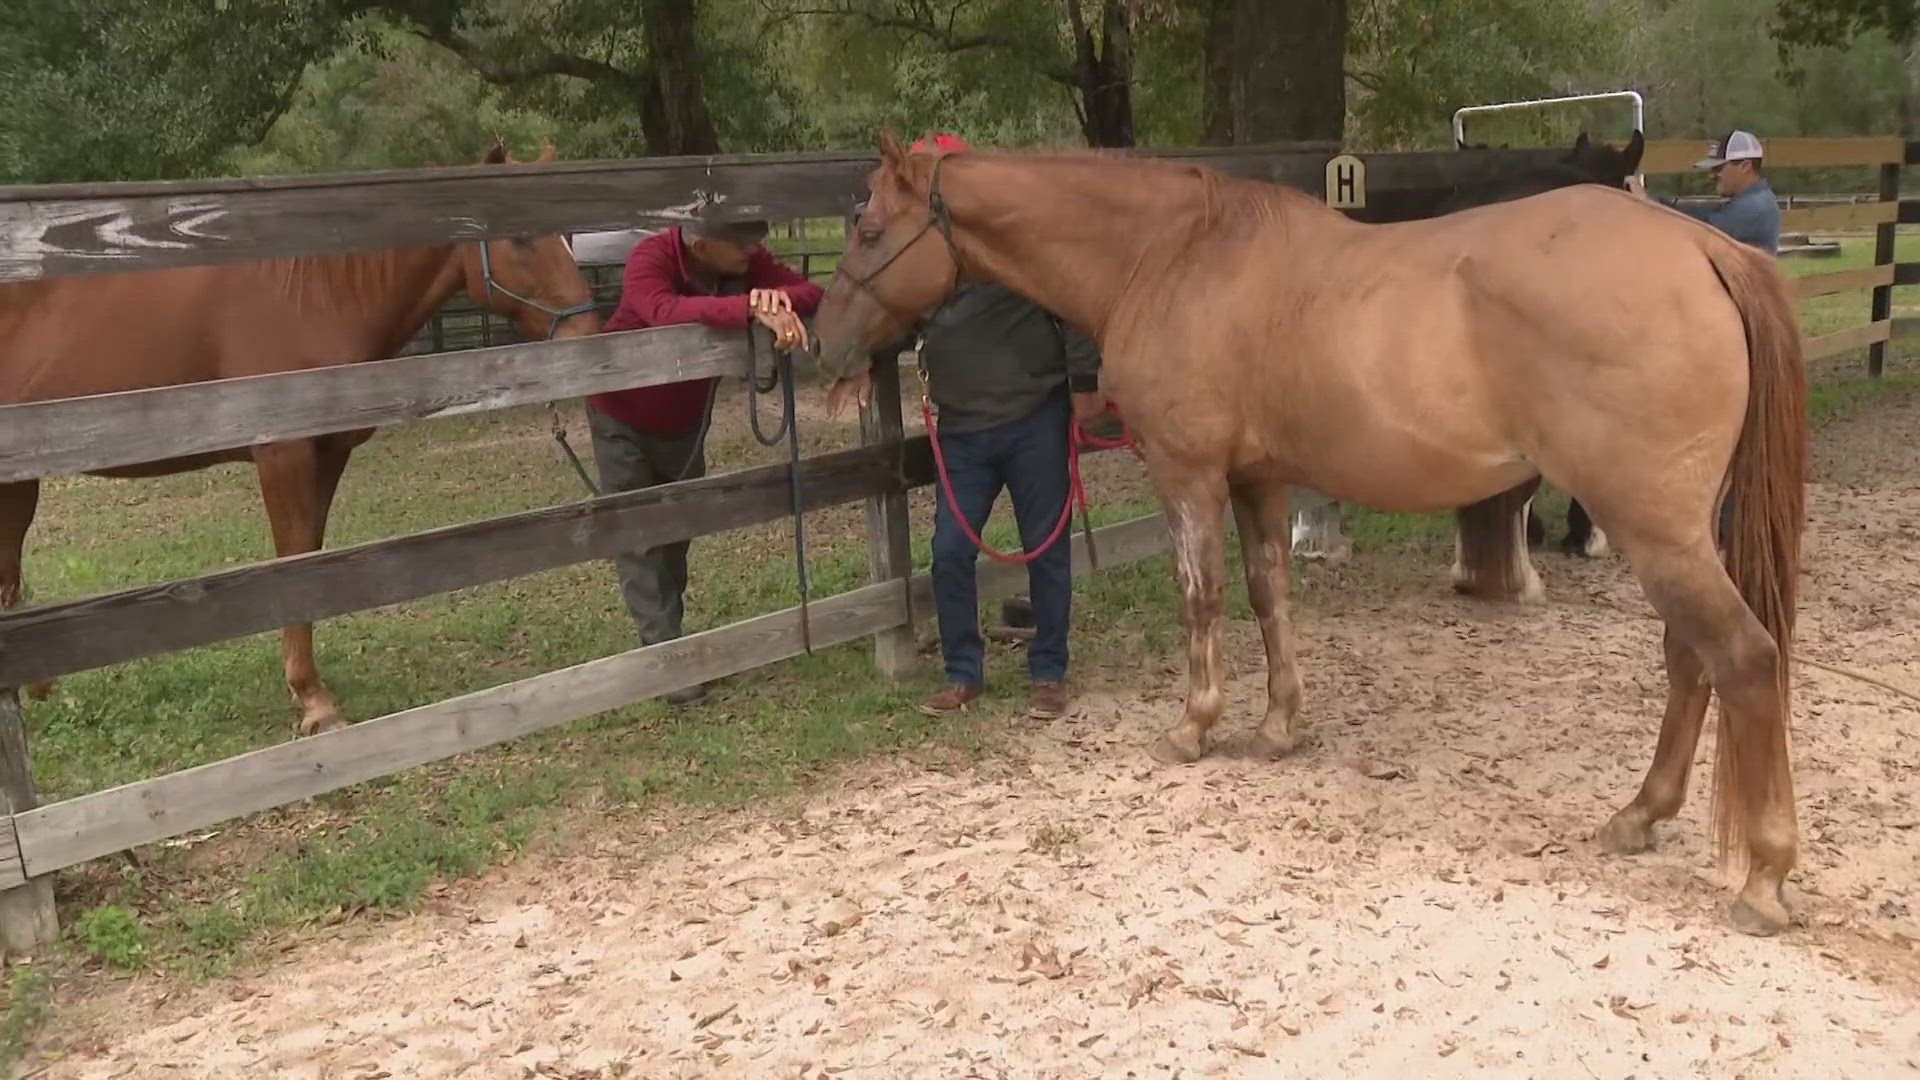 Henry's Home in Conroe takes in horses that have been rescued or surrendered. It also gives new life to veterans and first responders.